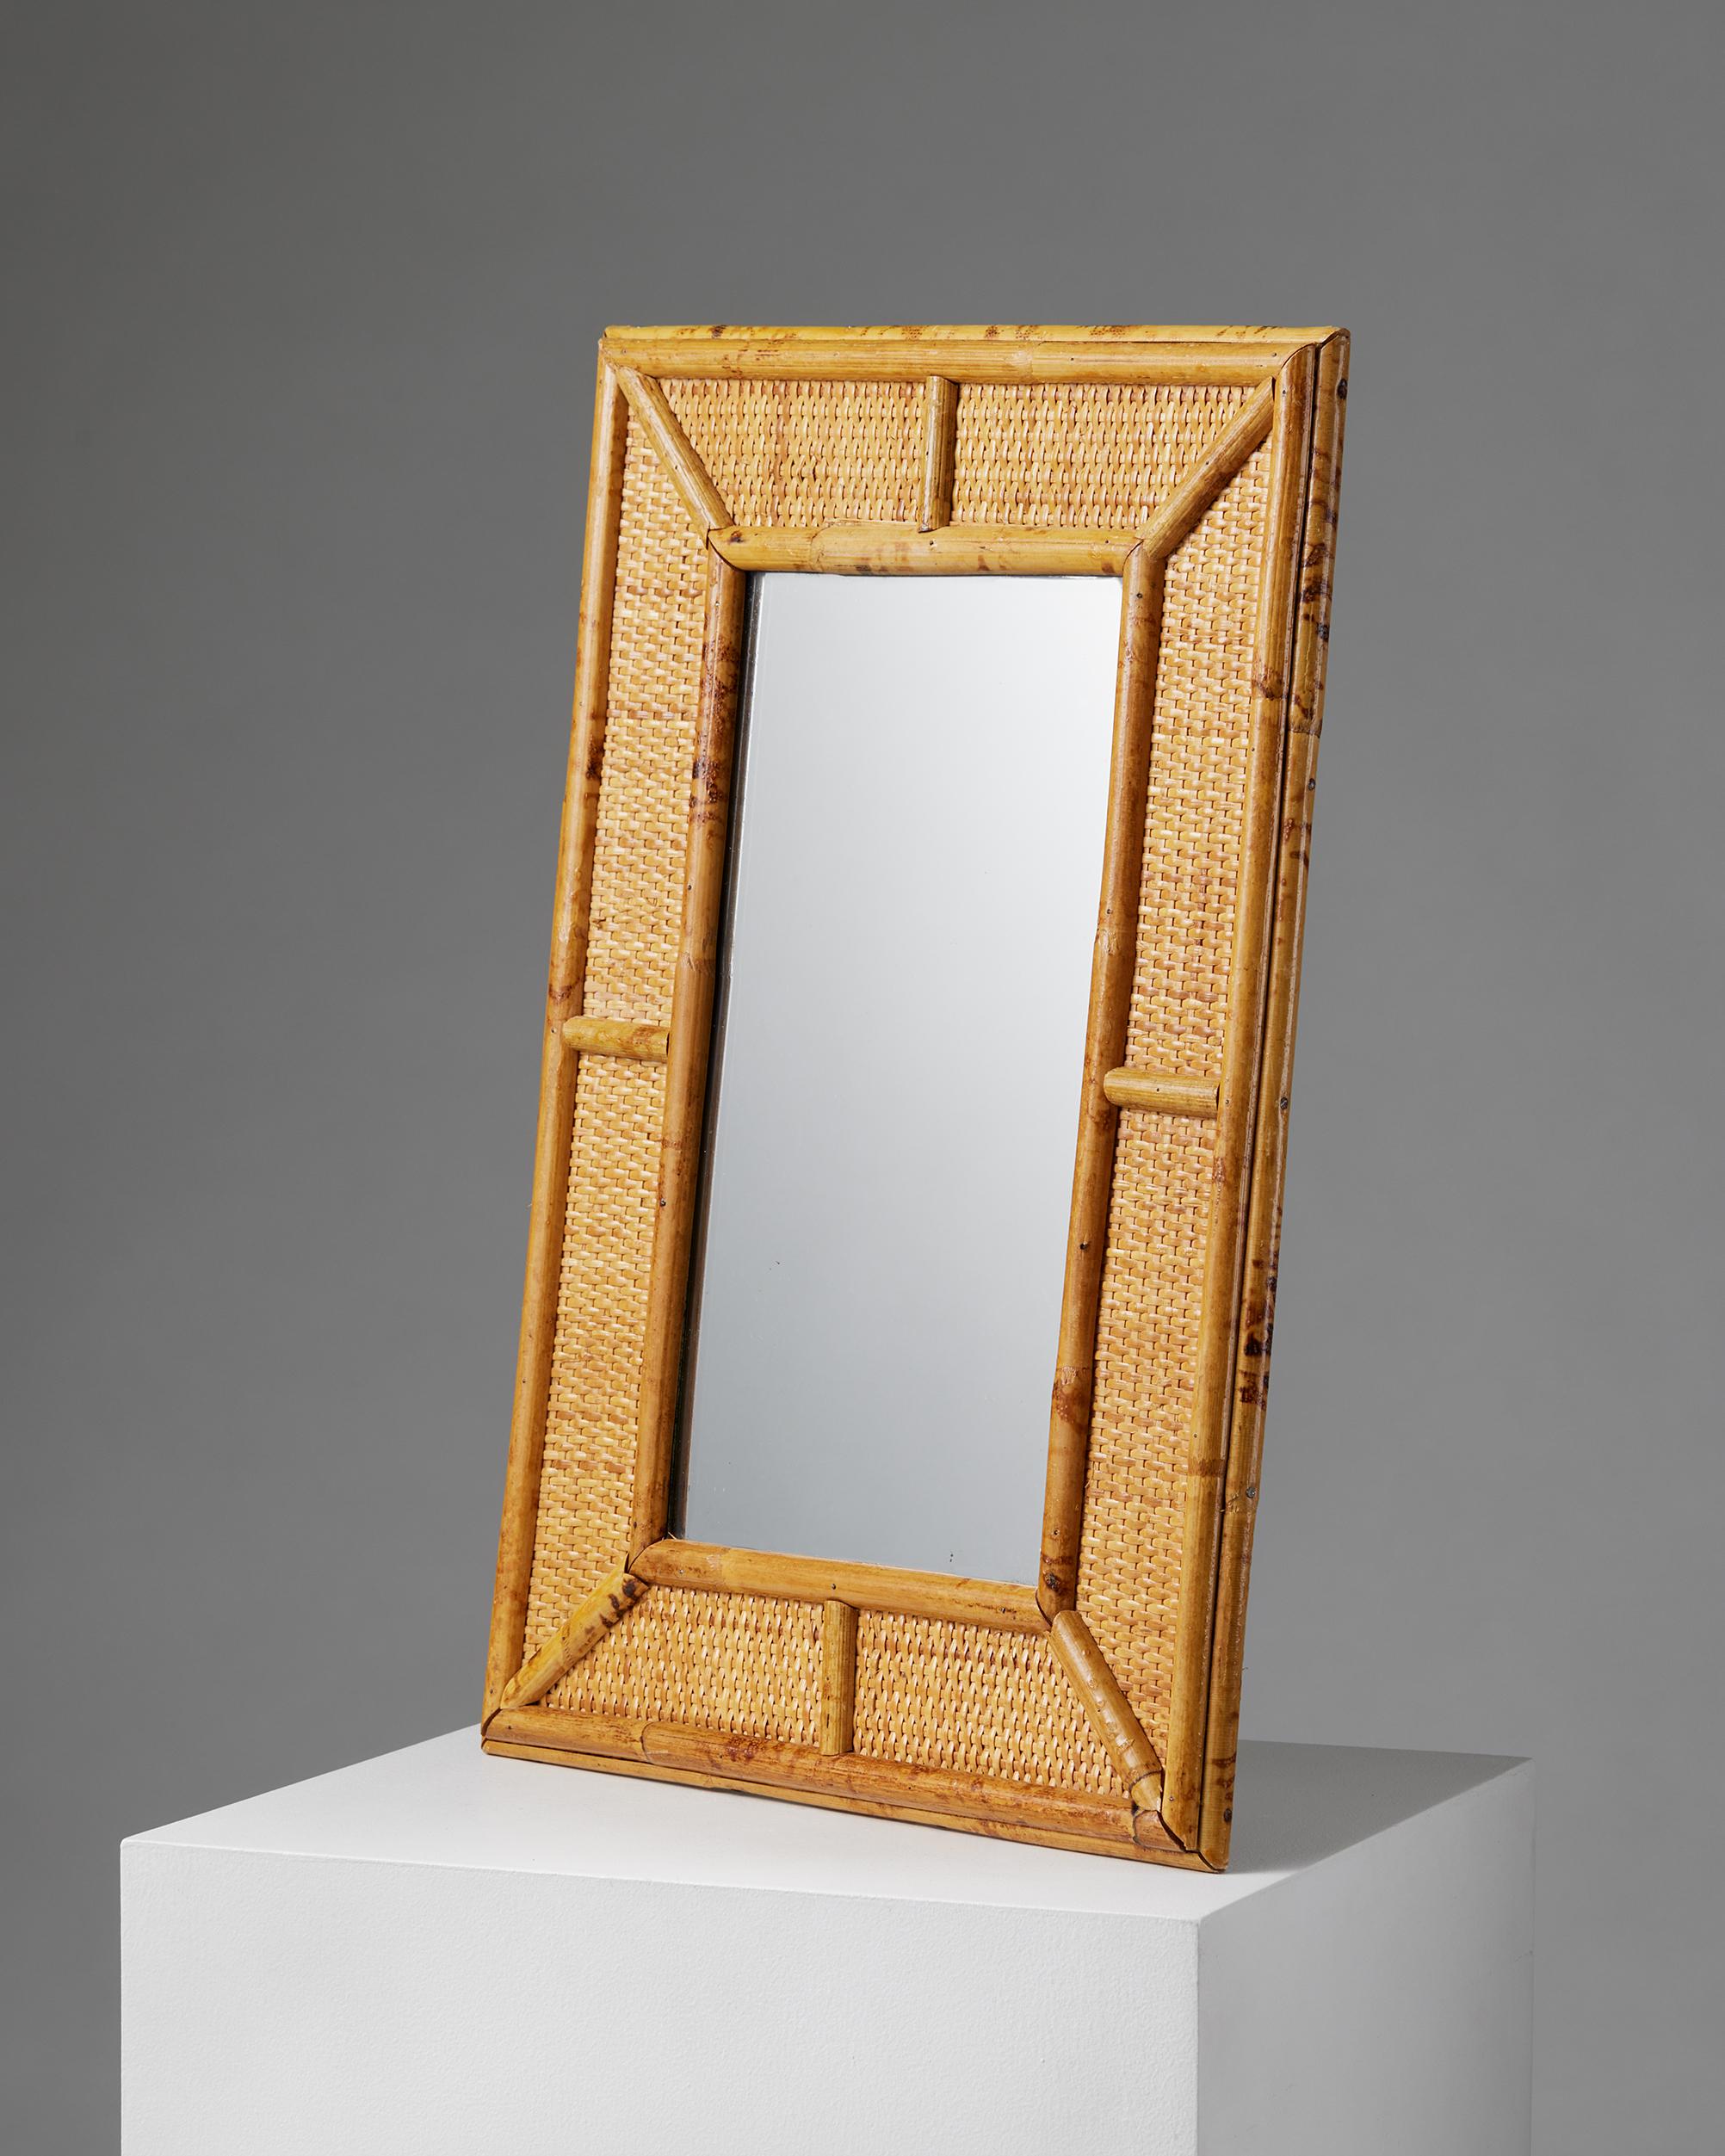 Mirror, anonymous for DUX,
Sweden, 1940s.

Bamboo, rattan, and mirrored glass.
